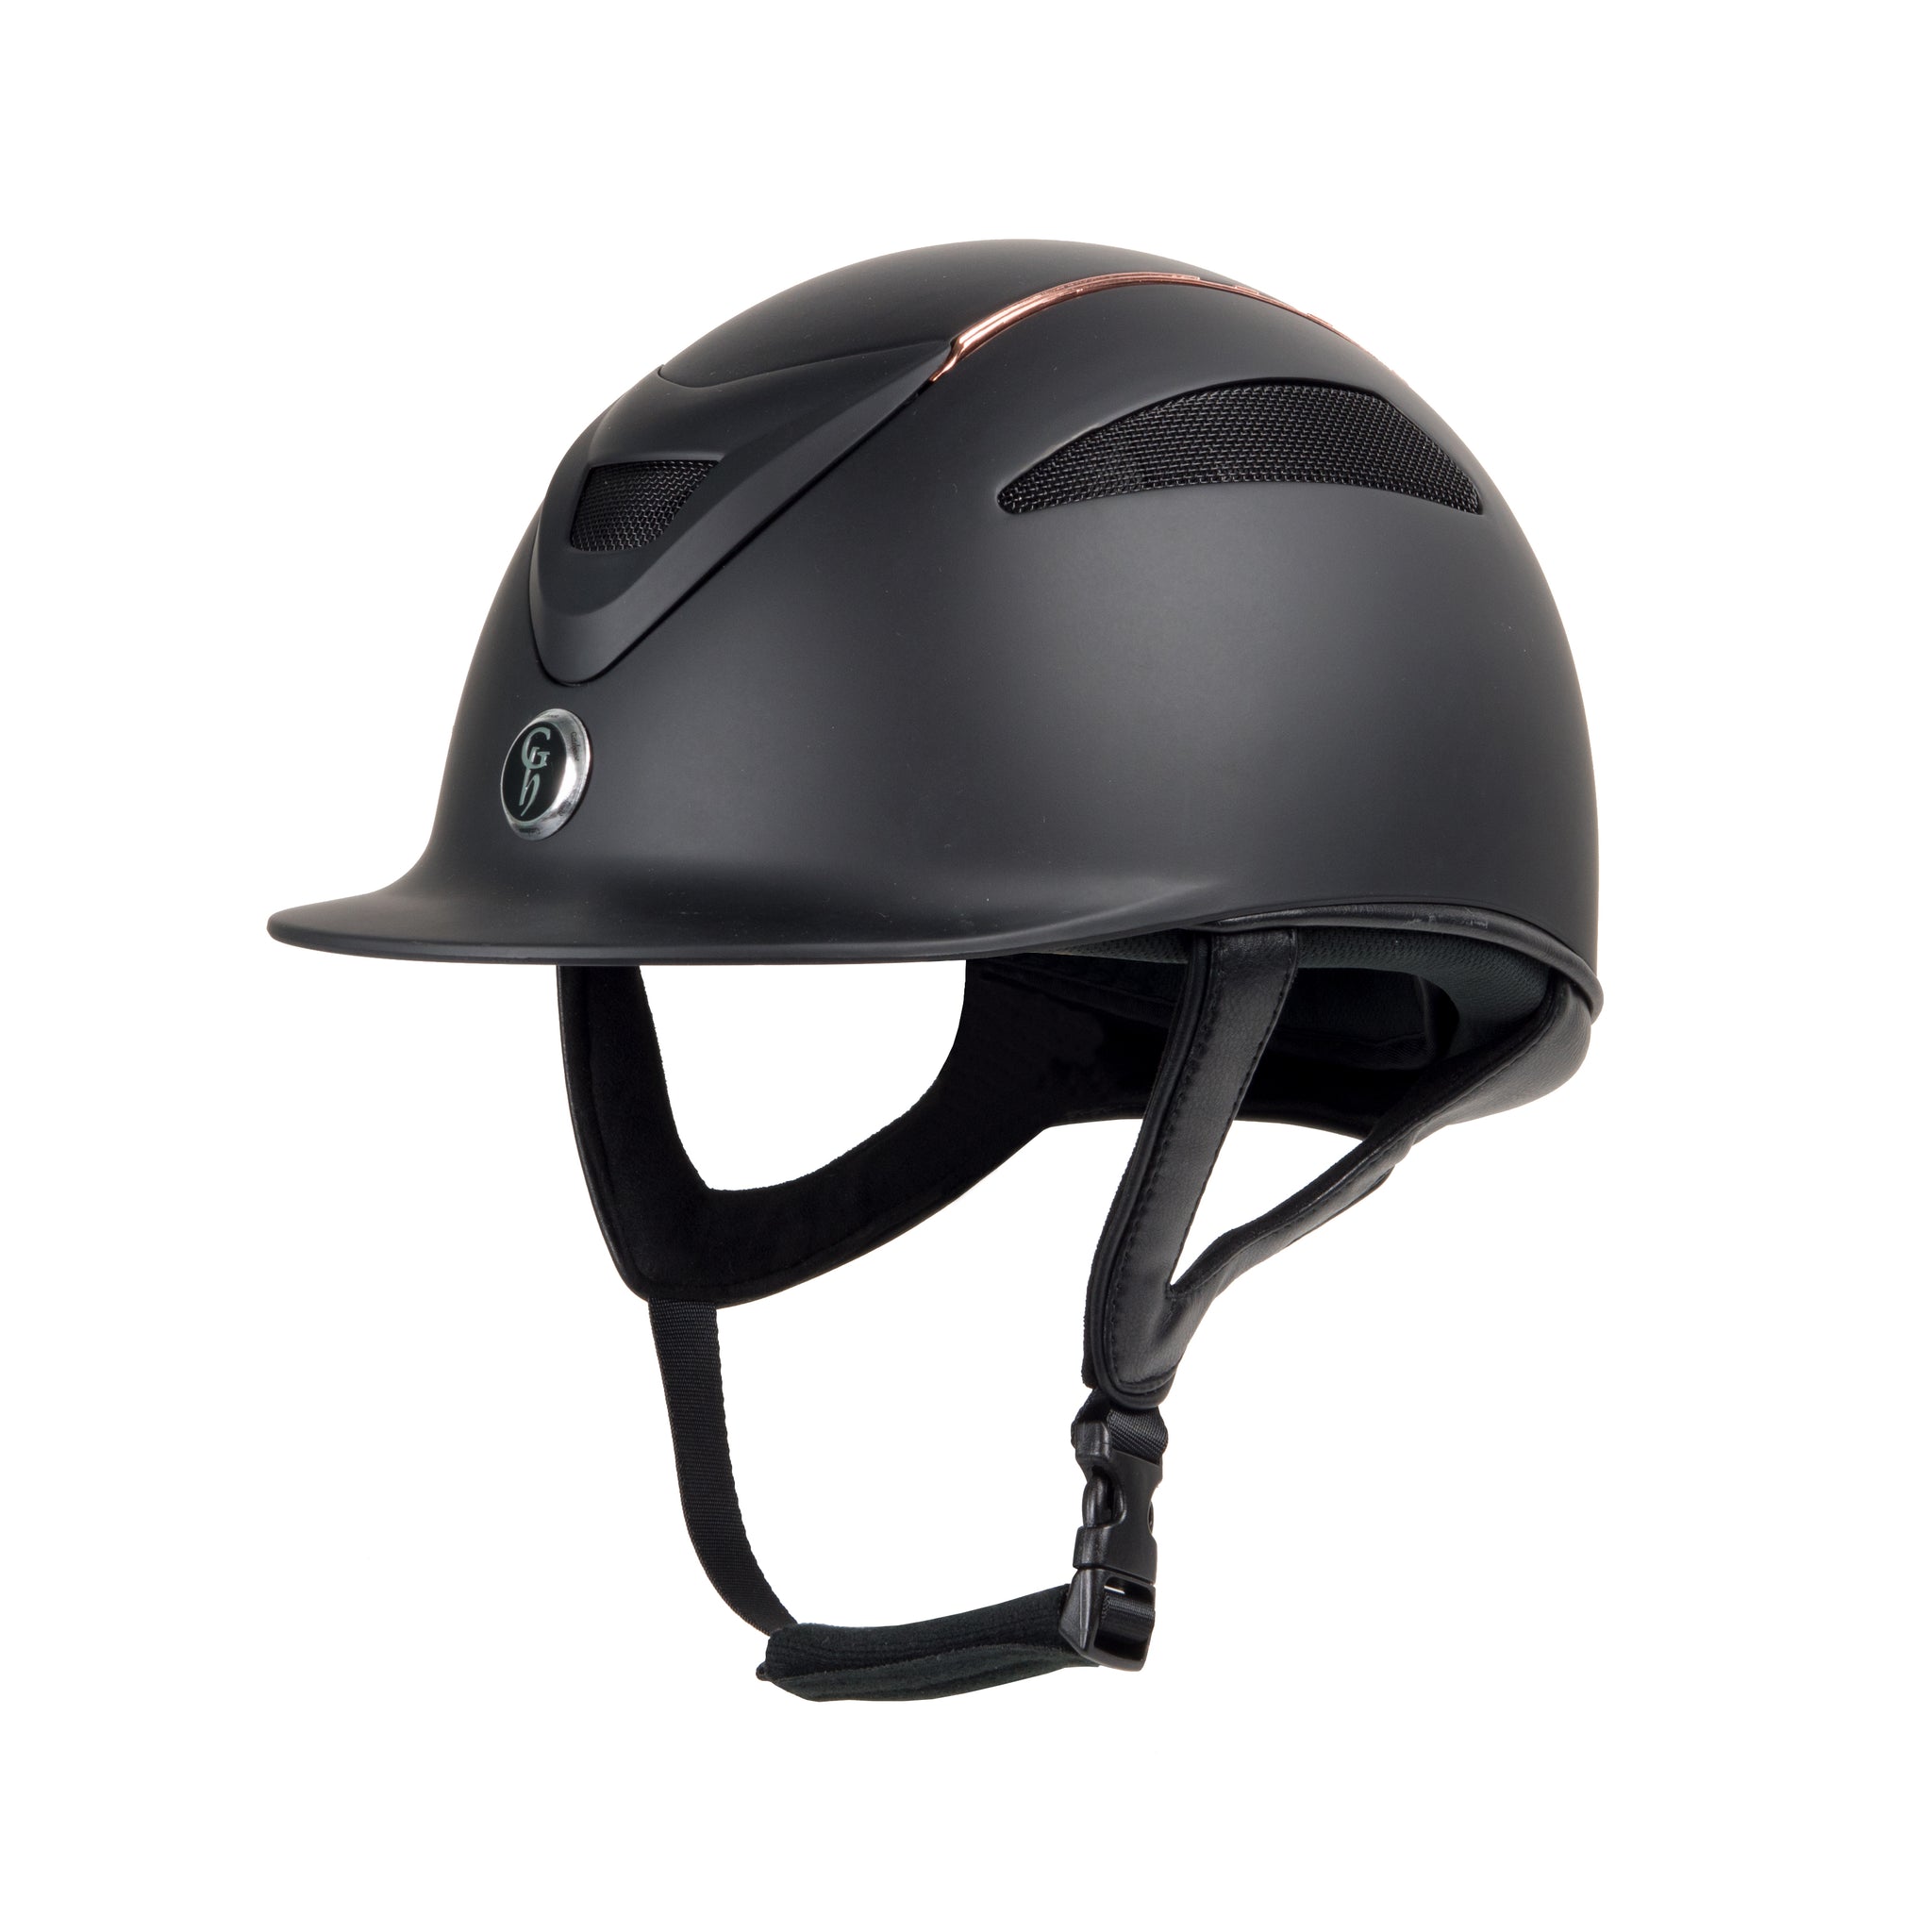 GH Conquest MKII - Riding Hat - Black/Rose Gold Limited Edition